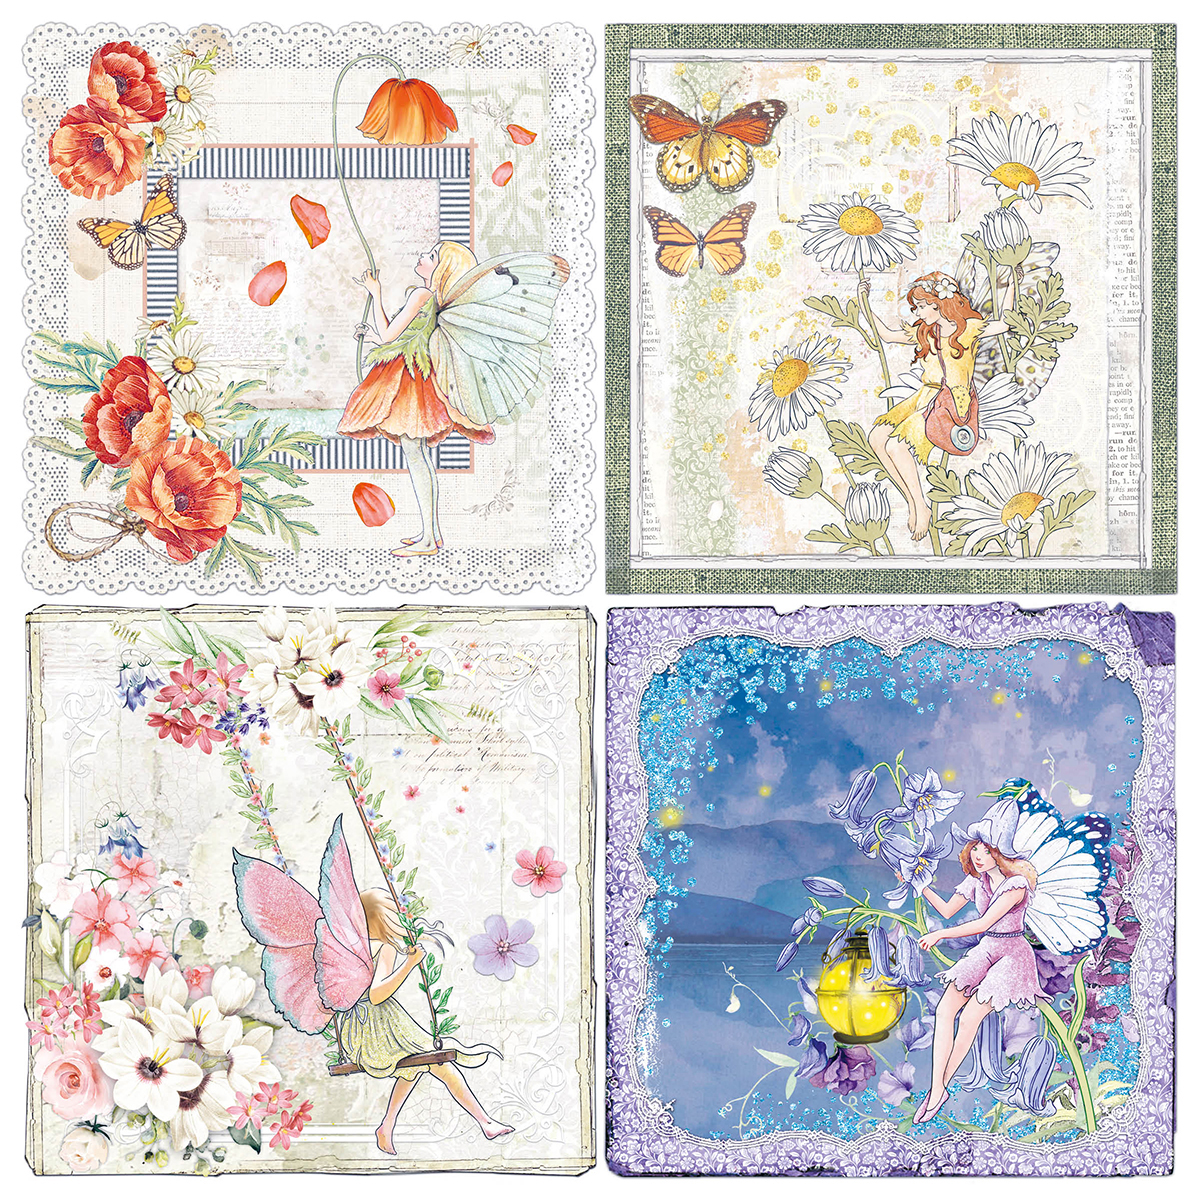 Ciao Bella Paperpad "Enchanted Land" 8x8 '' (20,3x20,3 cm)